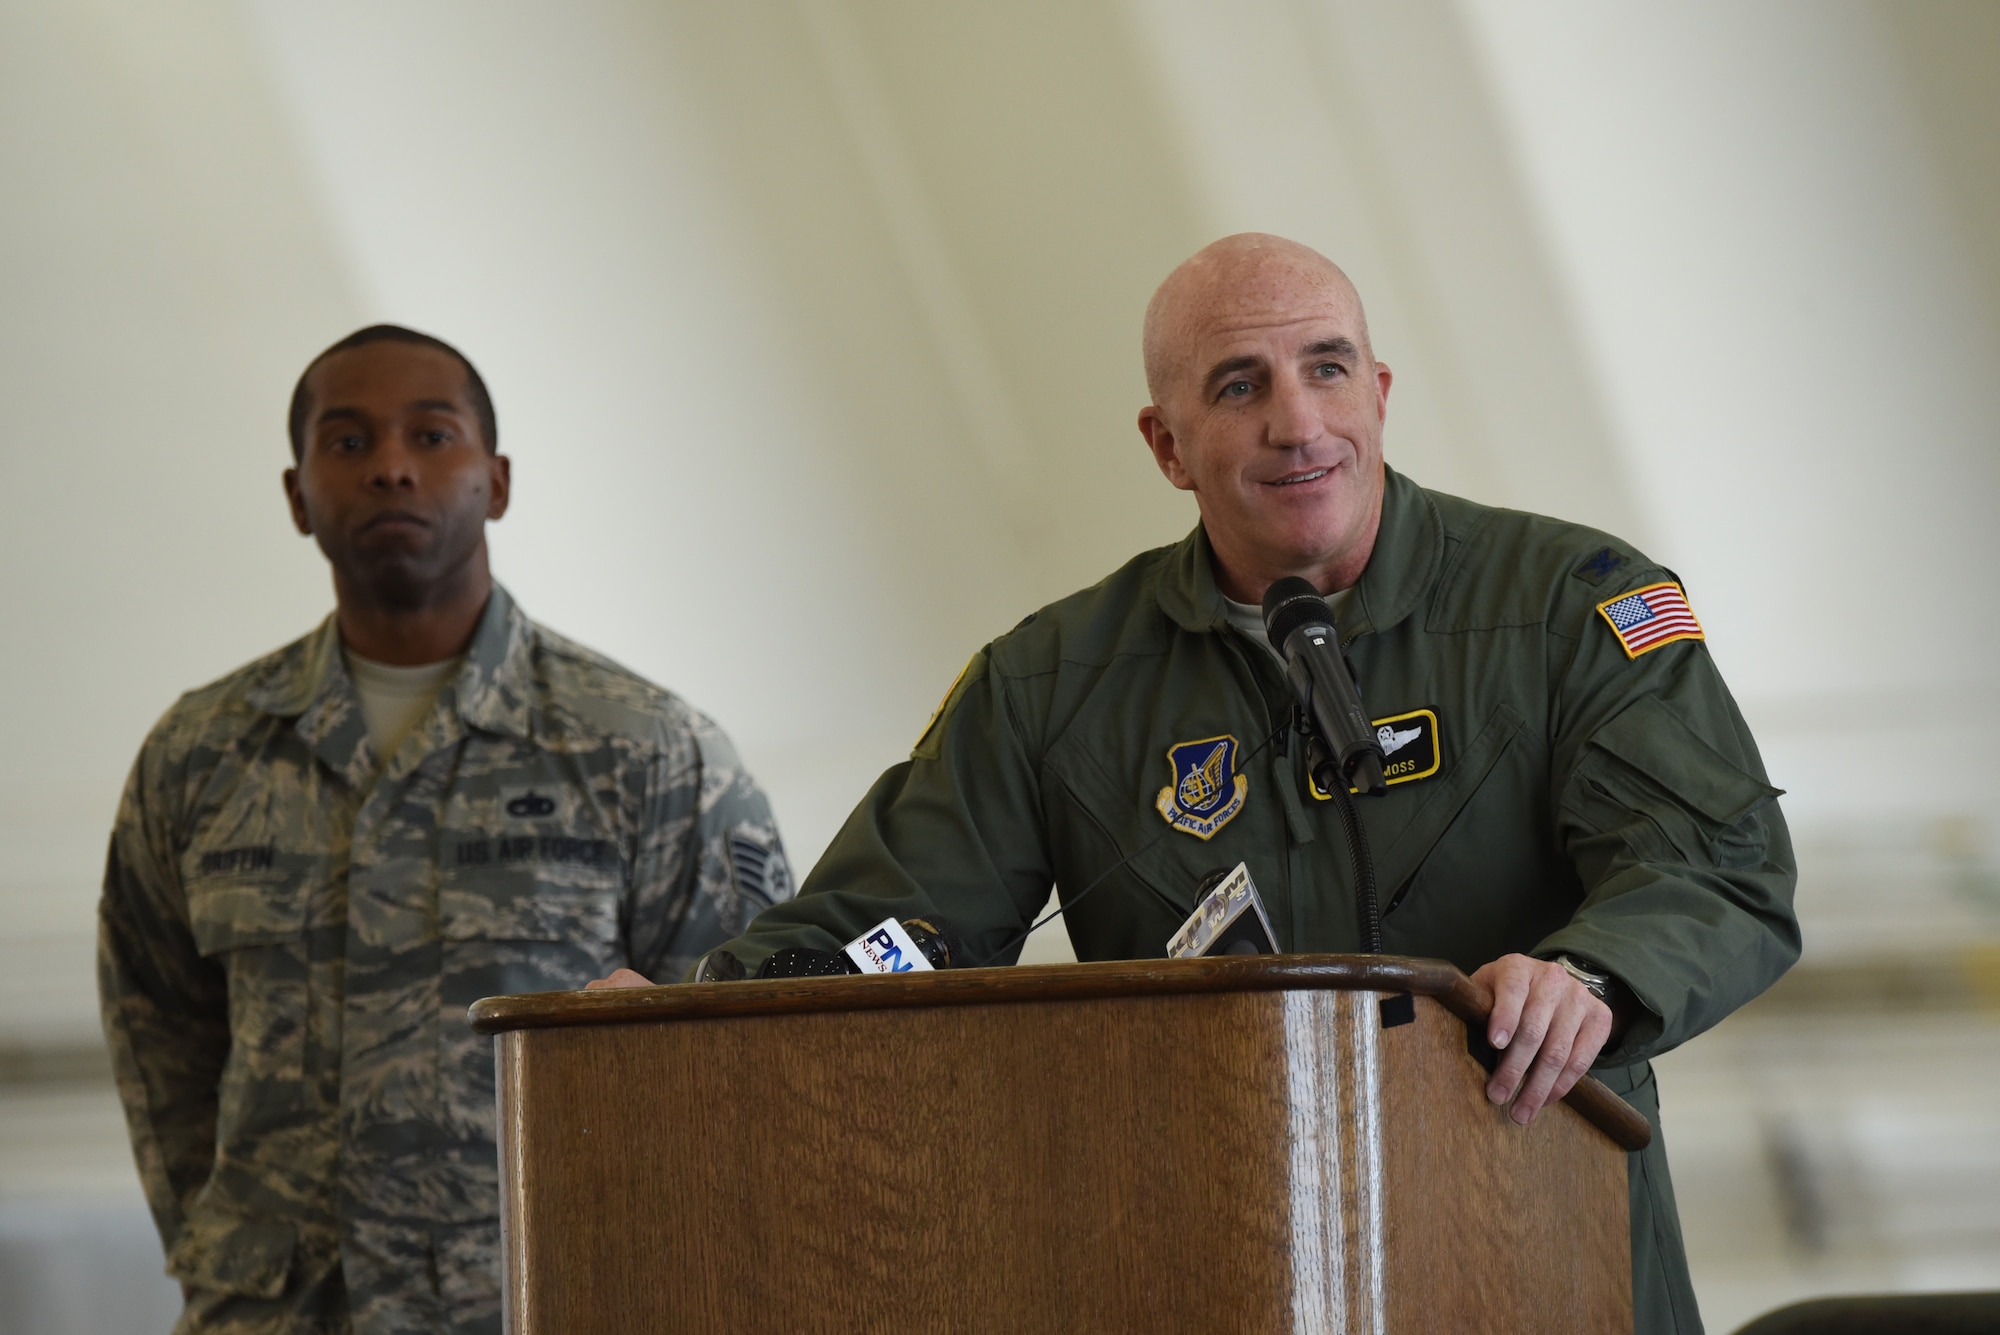 Col. Kenneth Moss, 374th Airlift Wing commander, speaks at the 2016 Operation Christmas Drop Push Ceremony Dec. 6, 2016, at Andersen Air Force Base, Guam. This is the second year of Operation Christmas Drop where aircrews from the Japan Air Self-Defense Force, Royal Australian Air Force and U.S. Air Force come together to train airlift capabilities for peace and wartime. (U.S. Air Force Photo by Airman 1st Class Jacob Skovo)